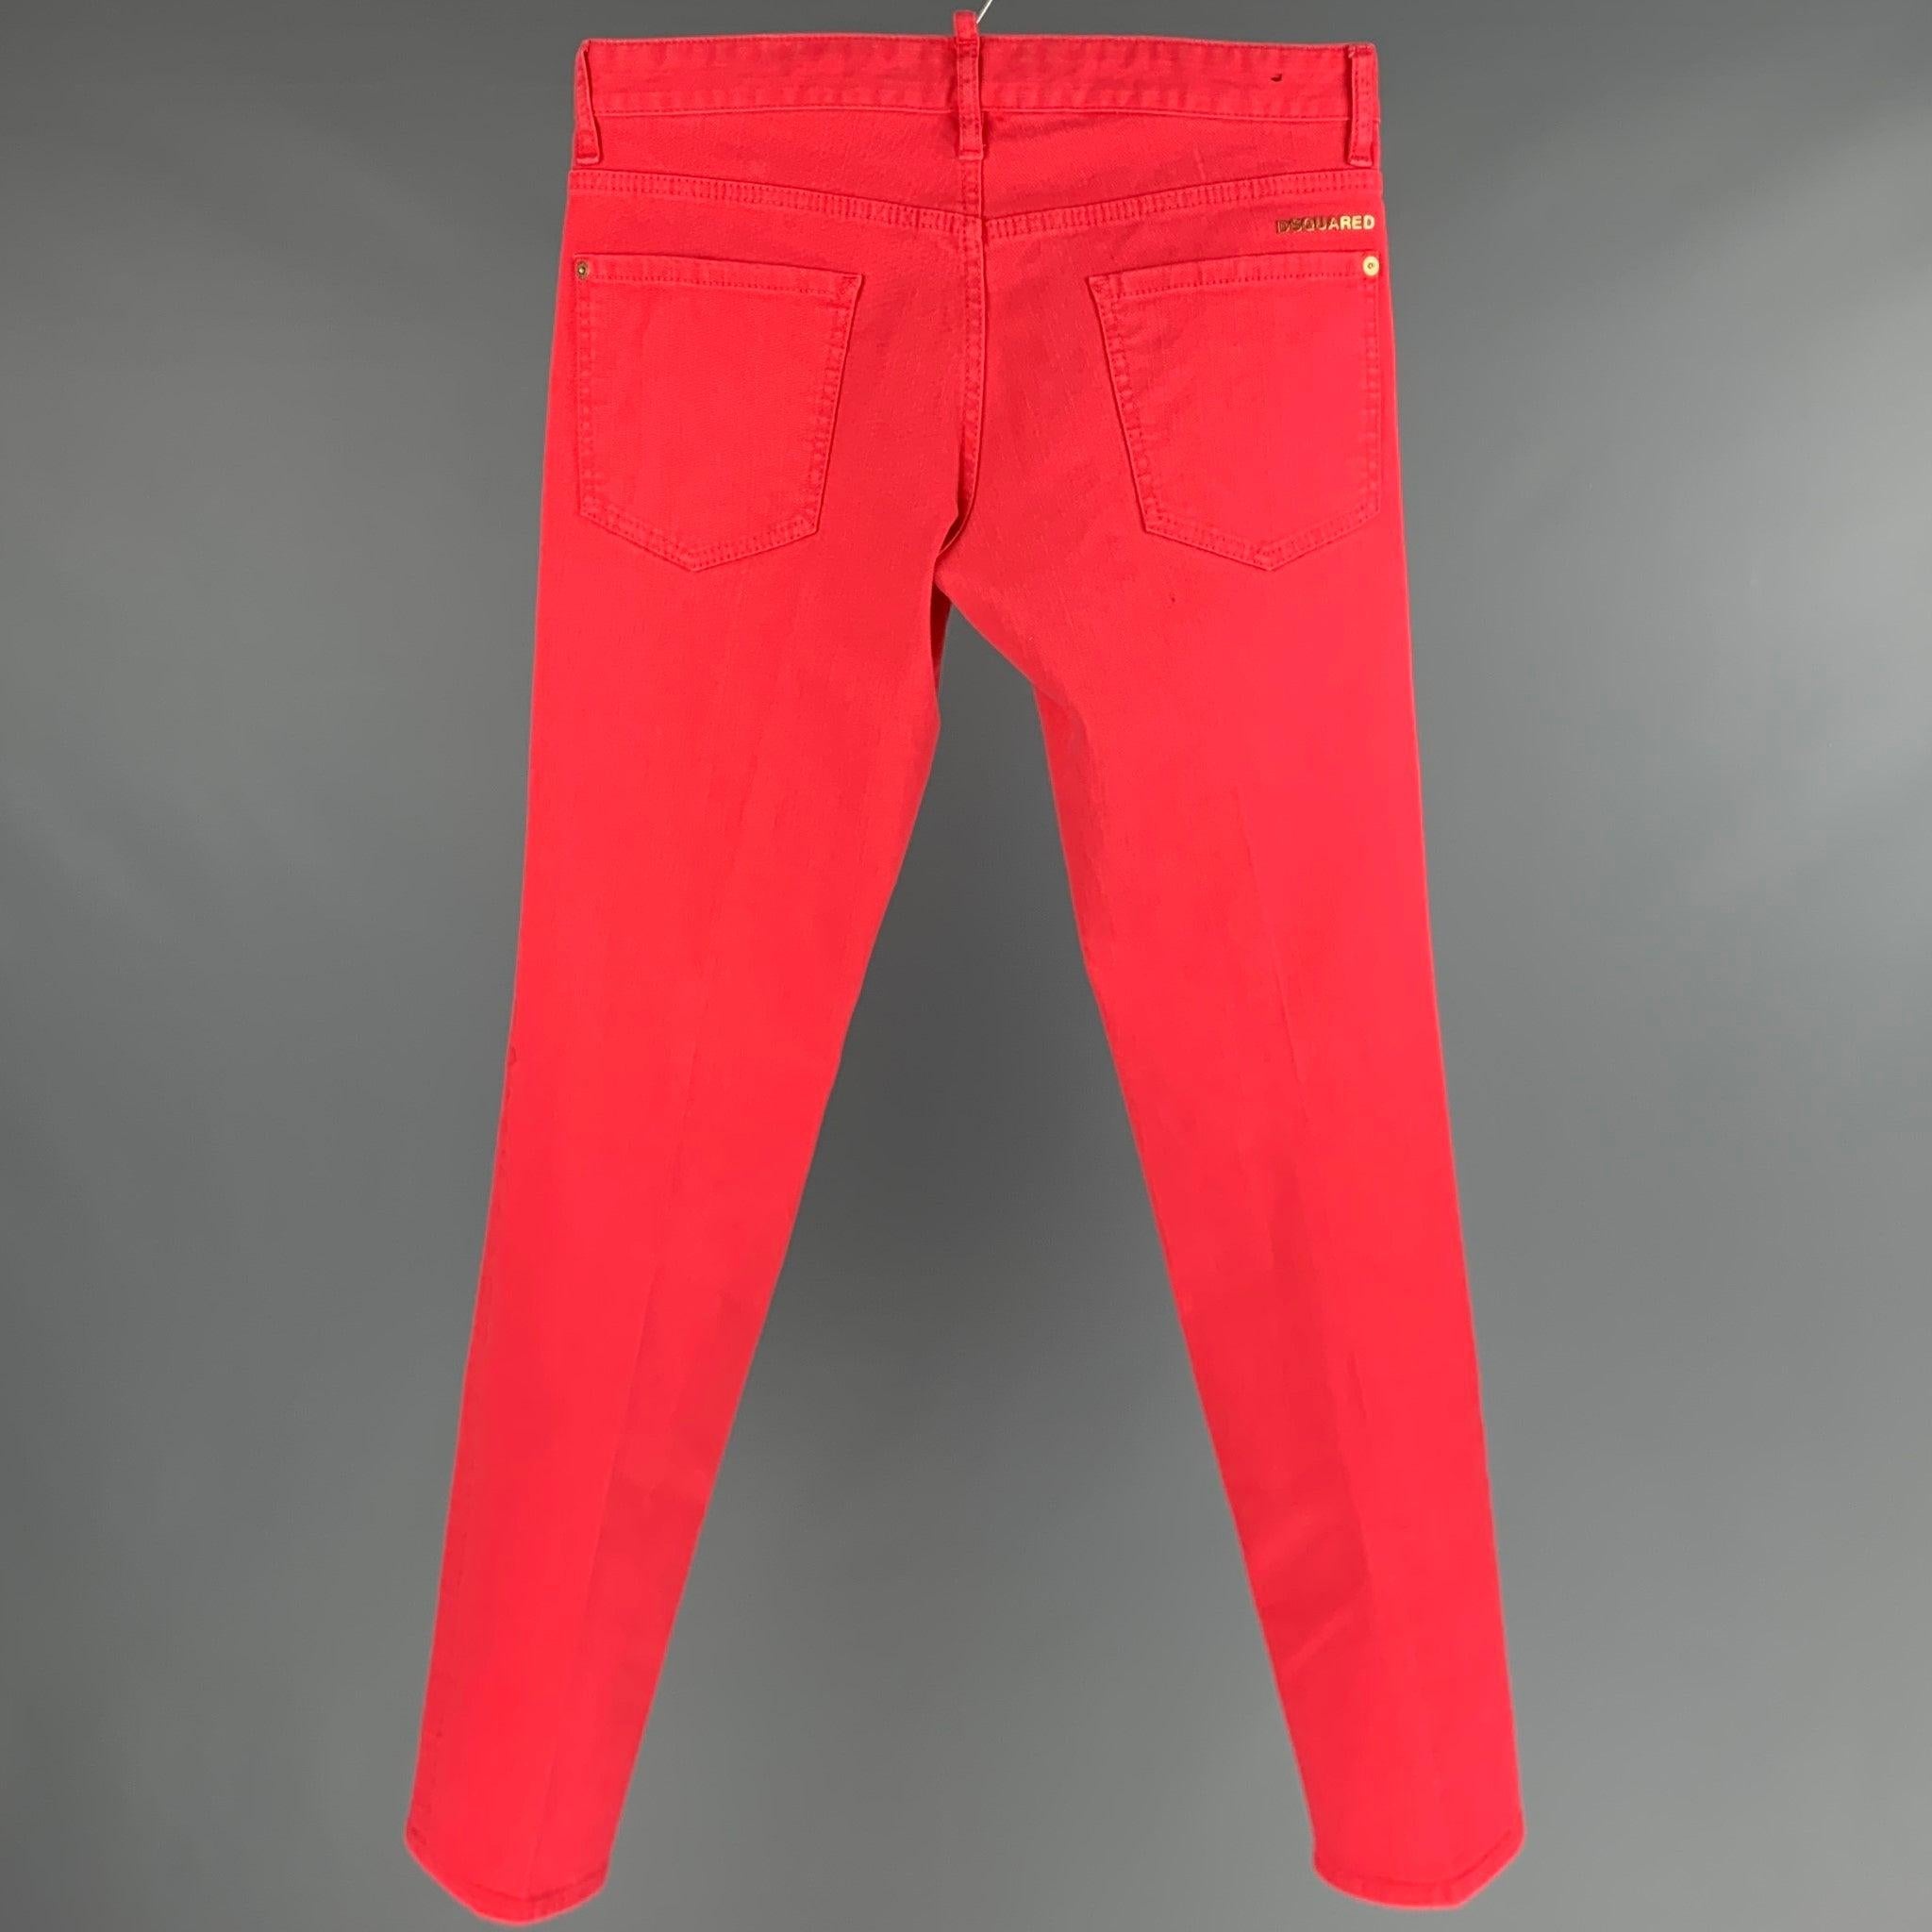 DSQUARED2 jeans
in a red cotton blend fabric featuring gold tone hardware, five pockets style, and button fly closure. Made in Italy.Very Good Pre-Owned Condition. Minor mark. 

Marked:   48 

Measurements: 
  Waist: 32 inches Rise: 7 inches Inseam: